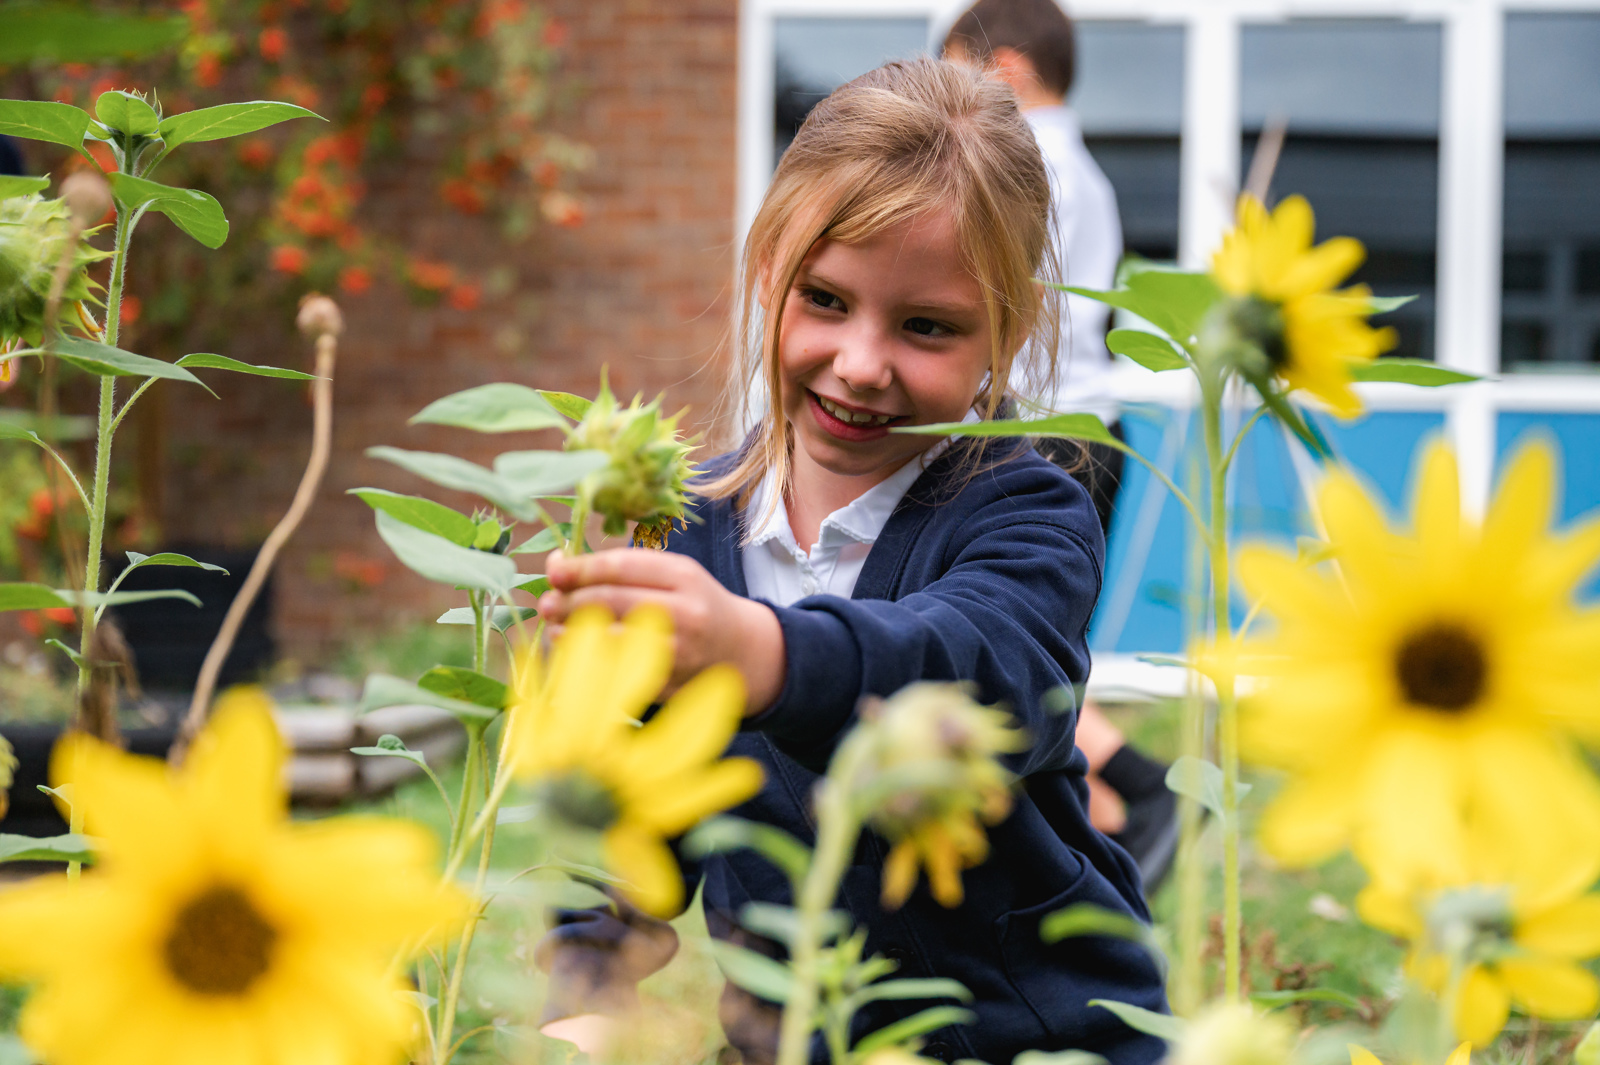 A girl sits in the allotment, smiling as she looks at one of the yellow flowers growing there.